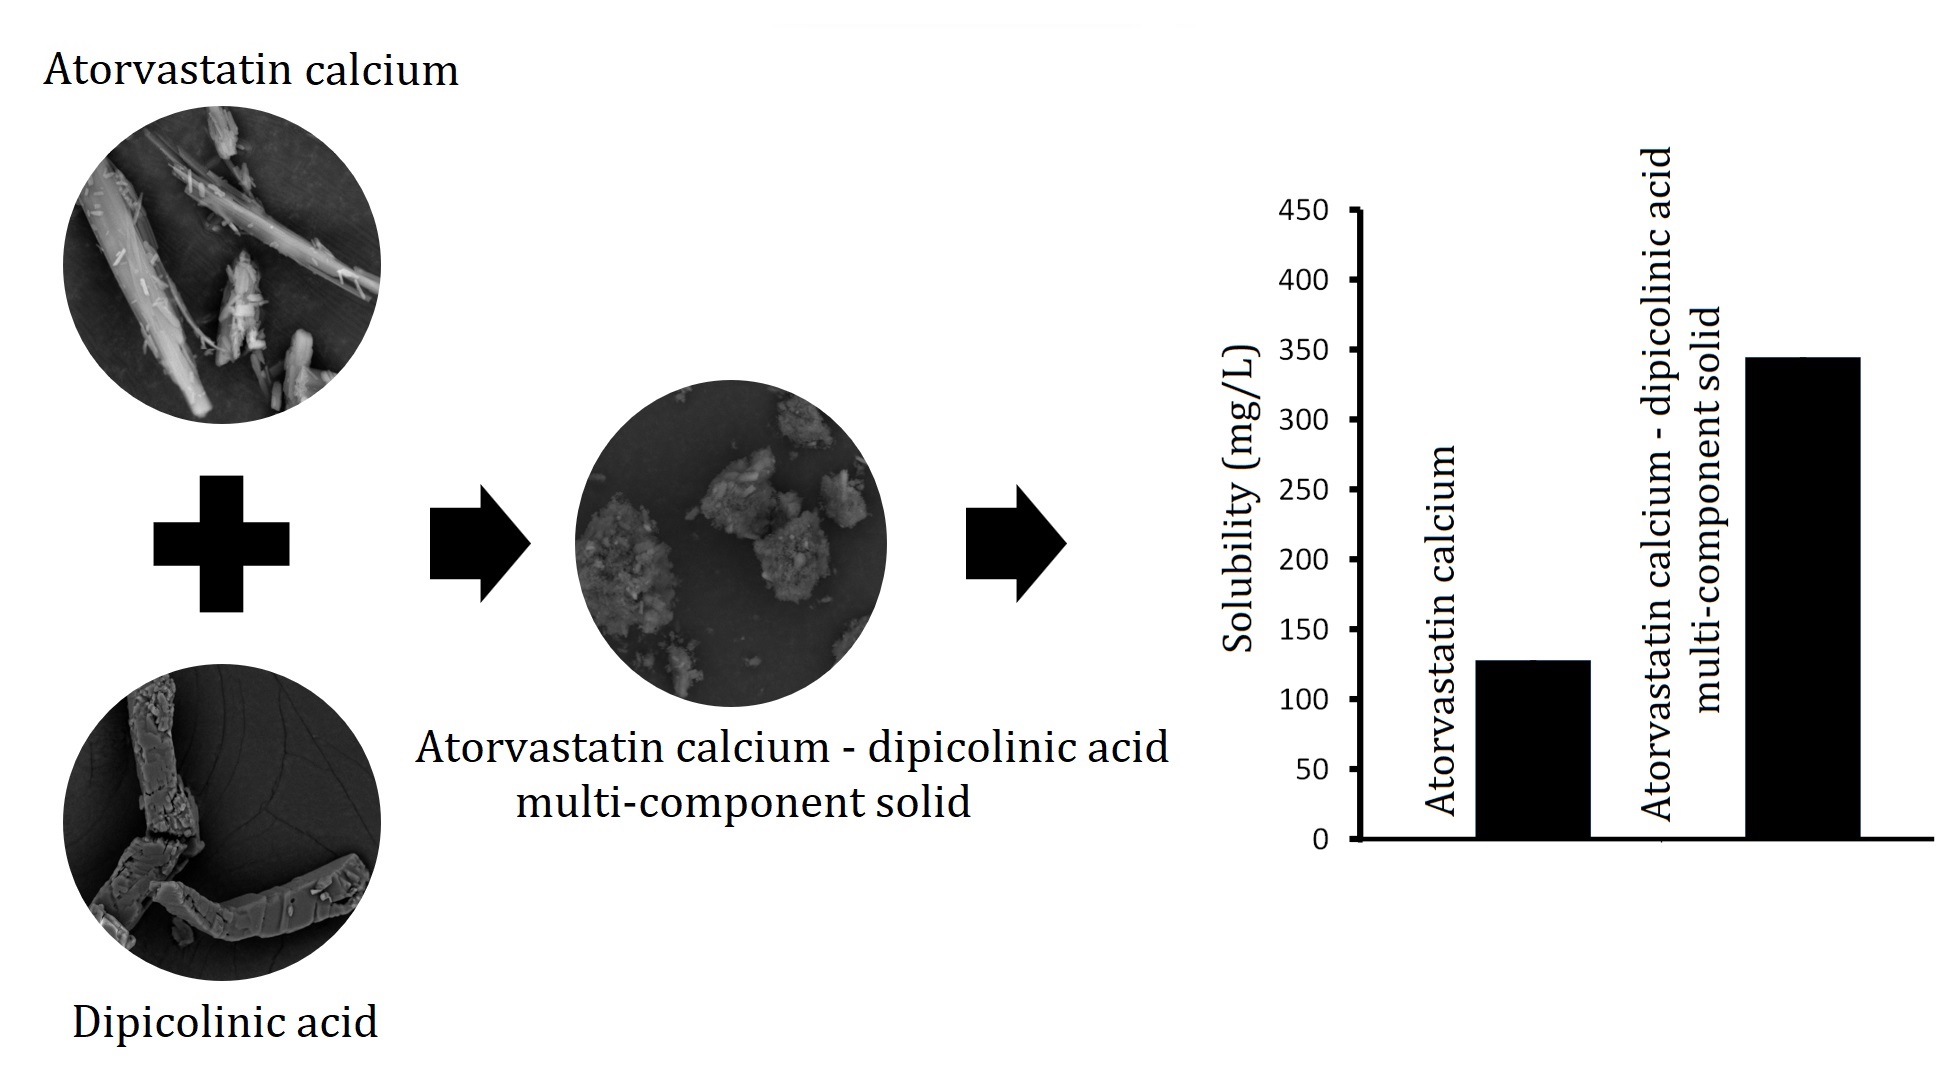 A New Multi-Component Solid of Atorvastatin Calcium with a Dipicolinic Acid Coformer for Improving the Water Solubility